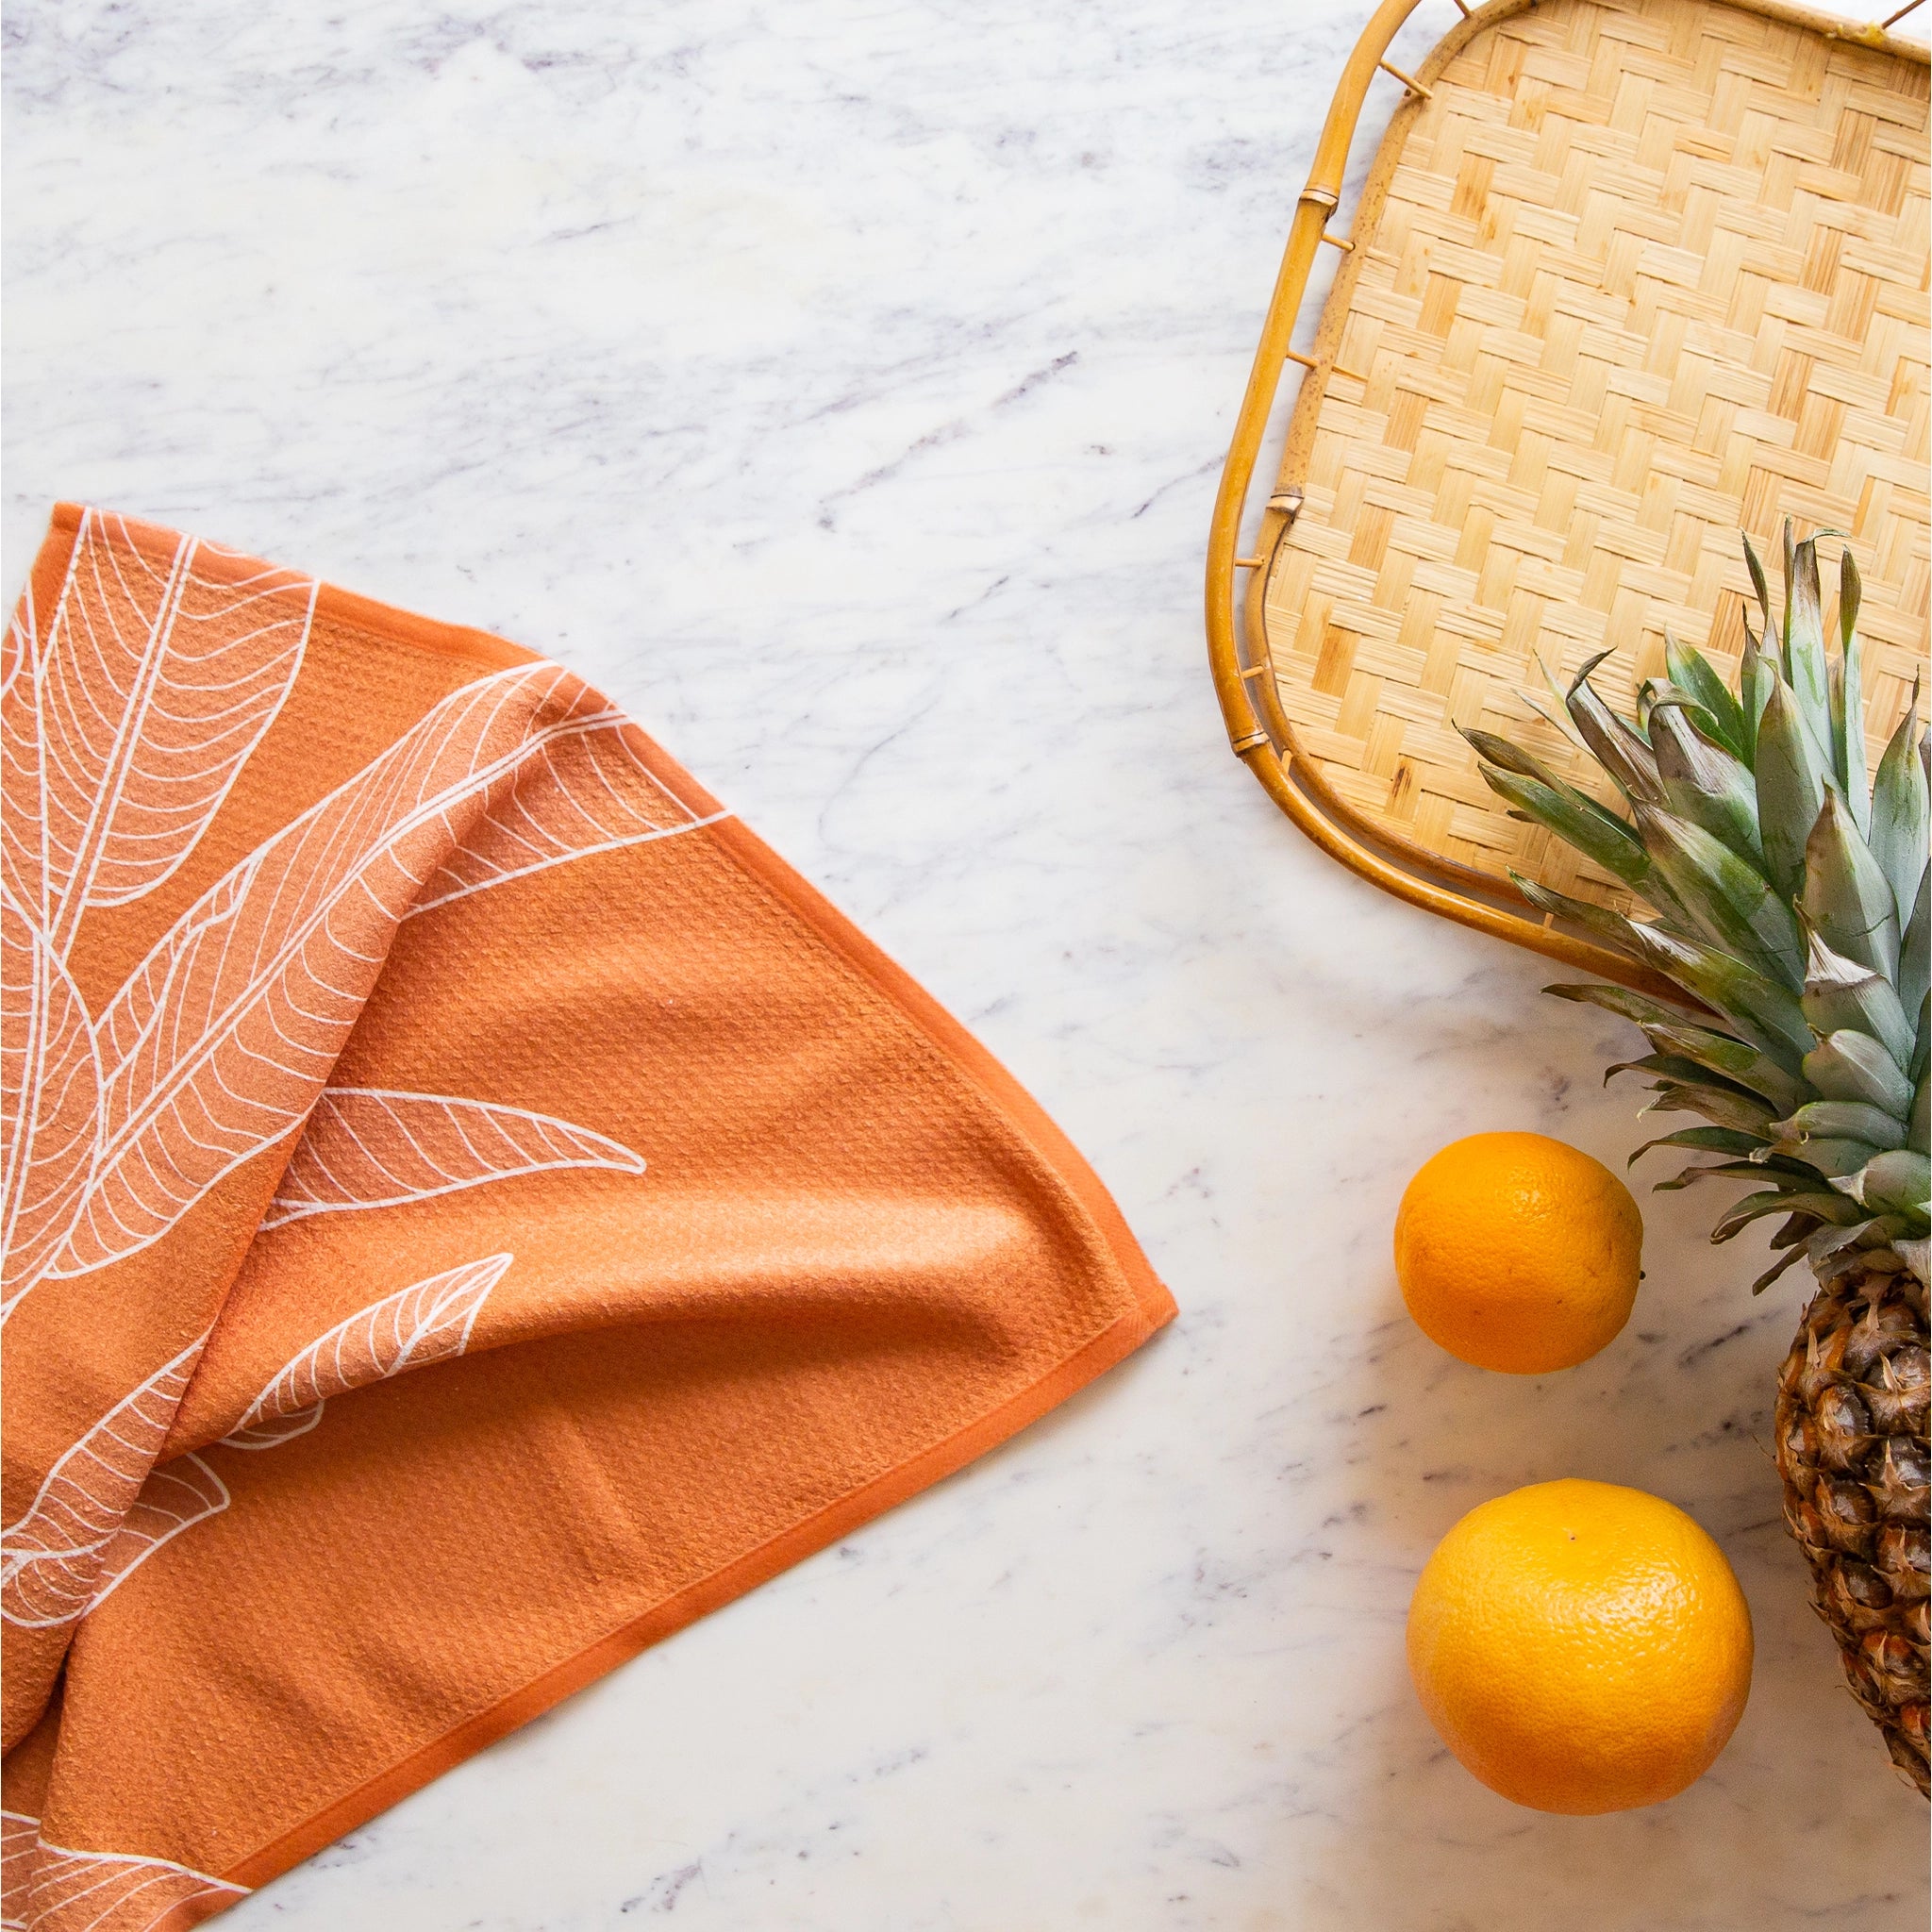 On a marble background is an orange kitchen towel with a white banana leaf design.